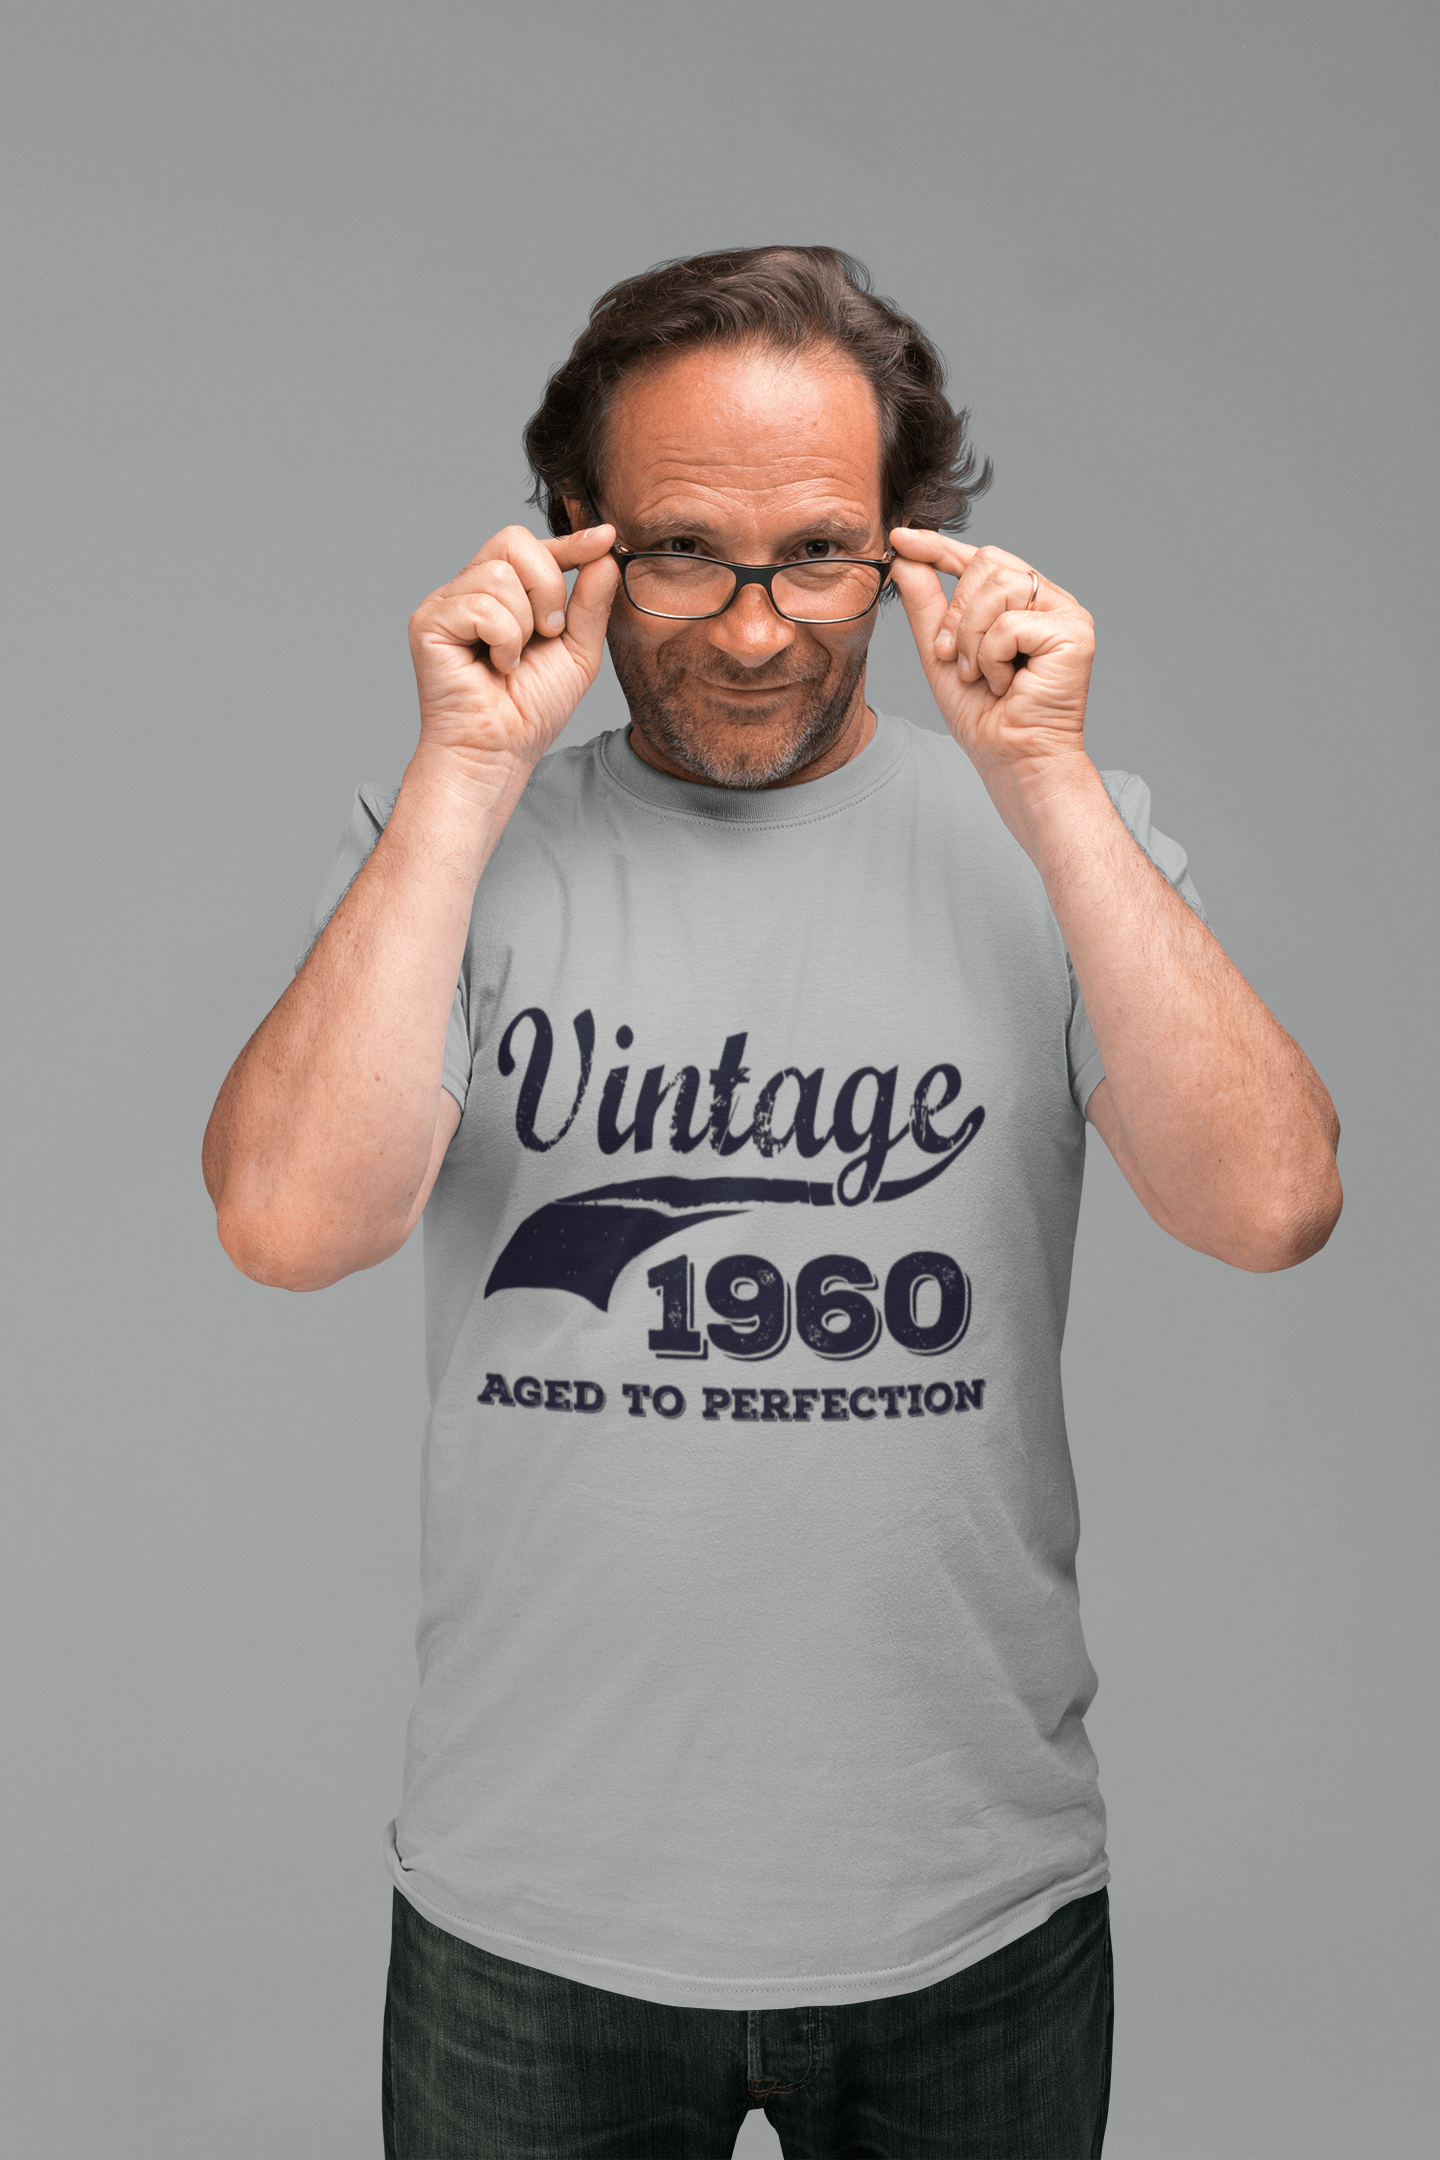 Vintage Aged to Perfection 1960, Grey, Men's Short Sleeve Round Neck T-shirt, gift t-shirt 00346